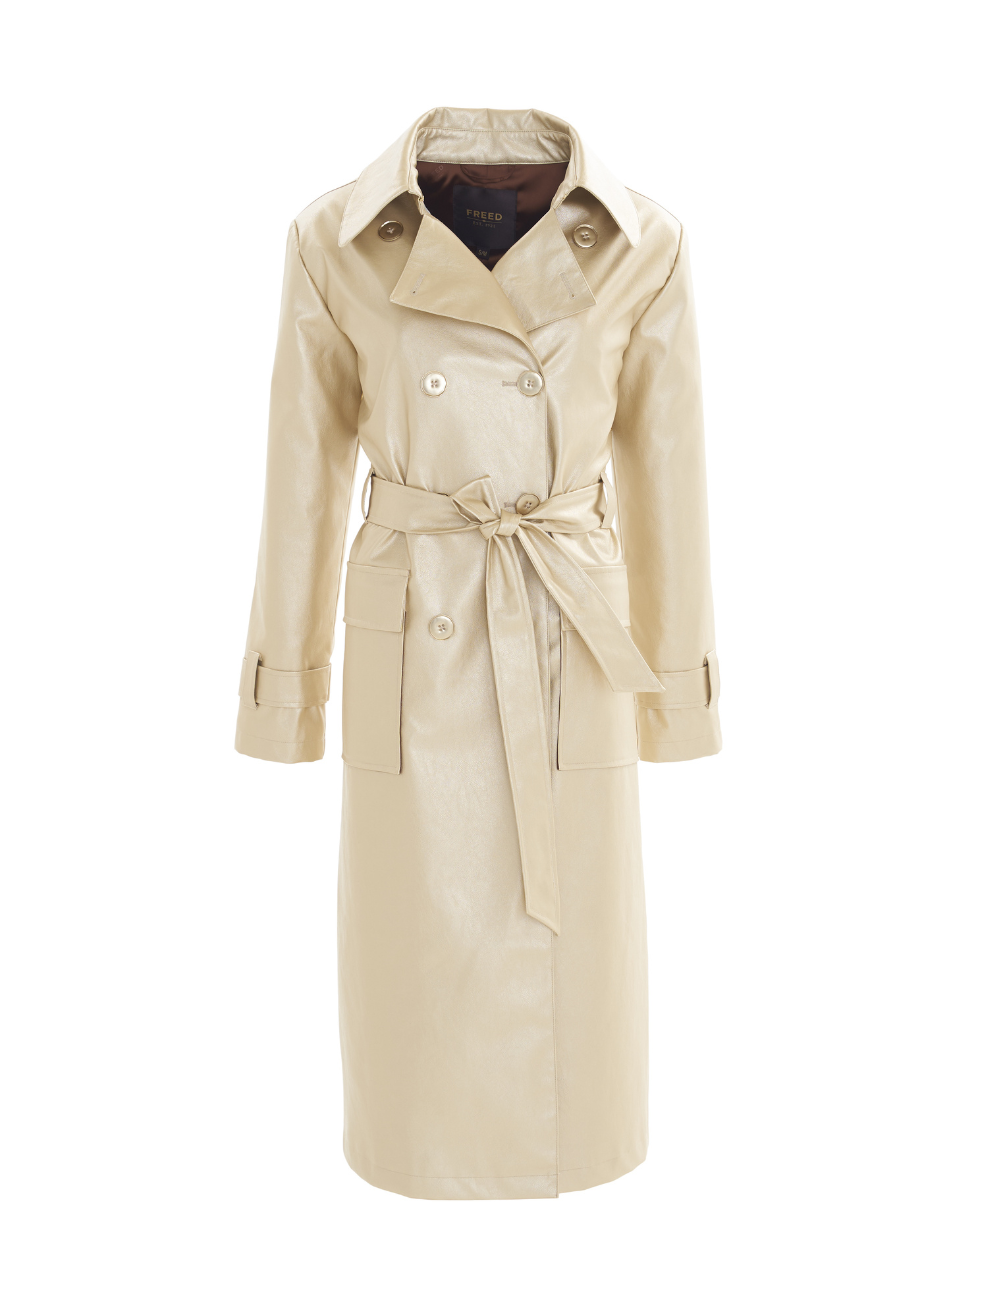 Gina Gold Trench Coat Canadian Slow Fashion Outerwear